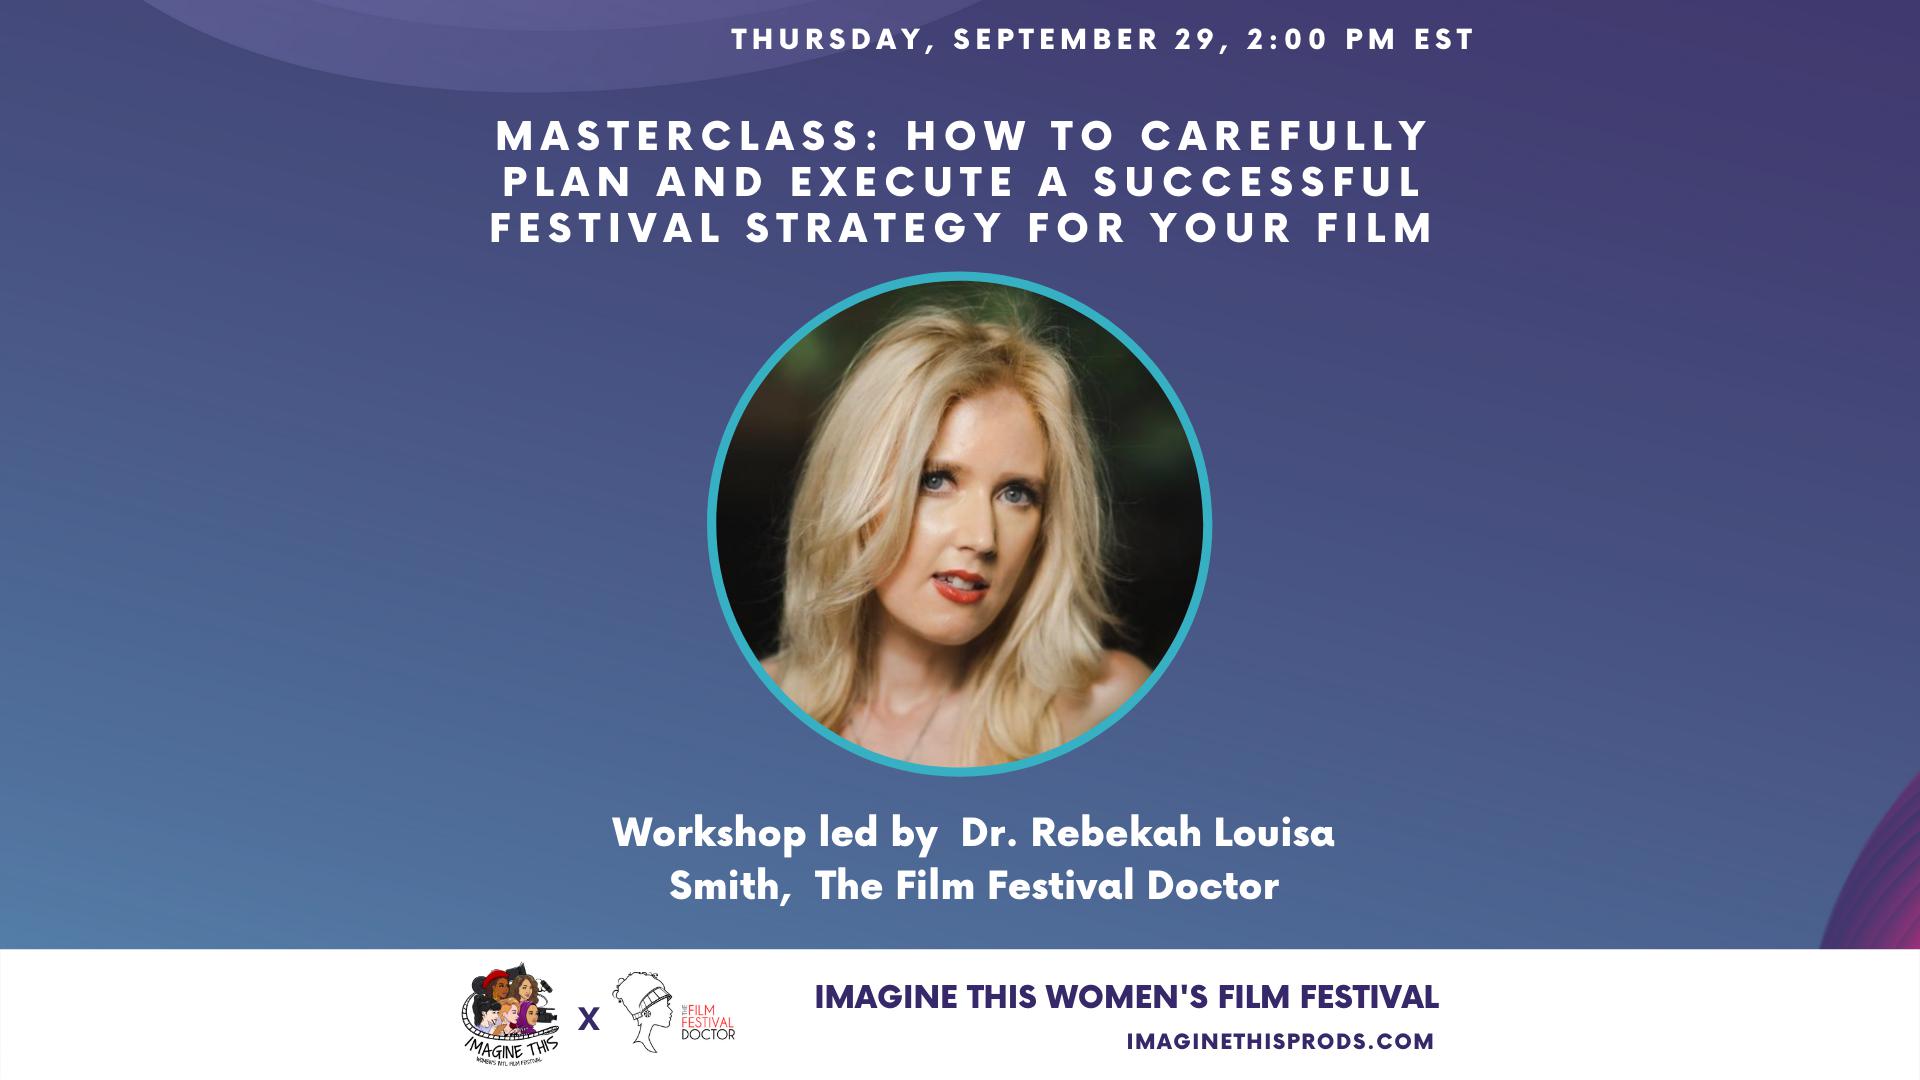 Masterclass: How To Carefully Plan And Execute A Successful Festival Strategy For Your Film.